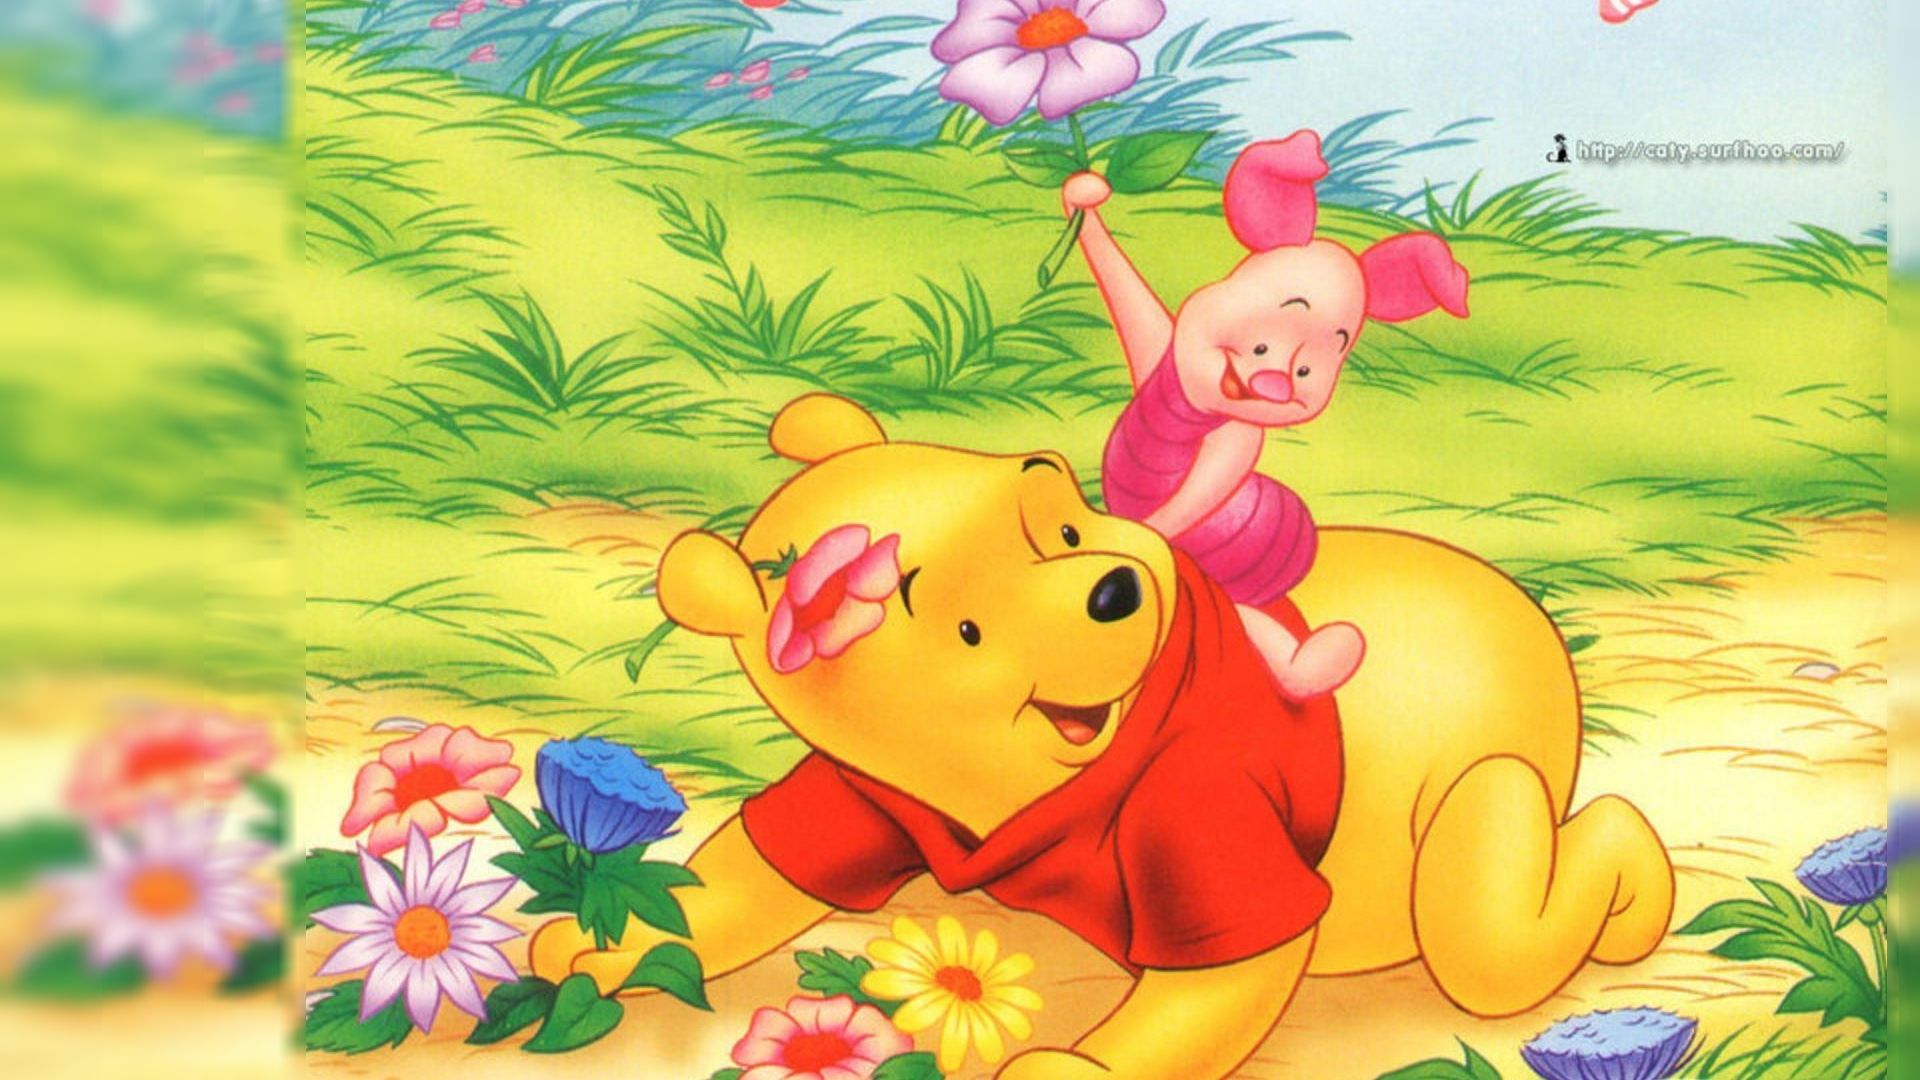 83 Winnie The Pooh HD Wallpapers | Backgrounds - Wallpaper Abyss ...